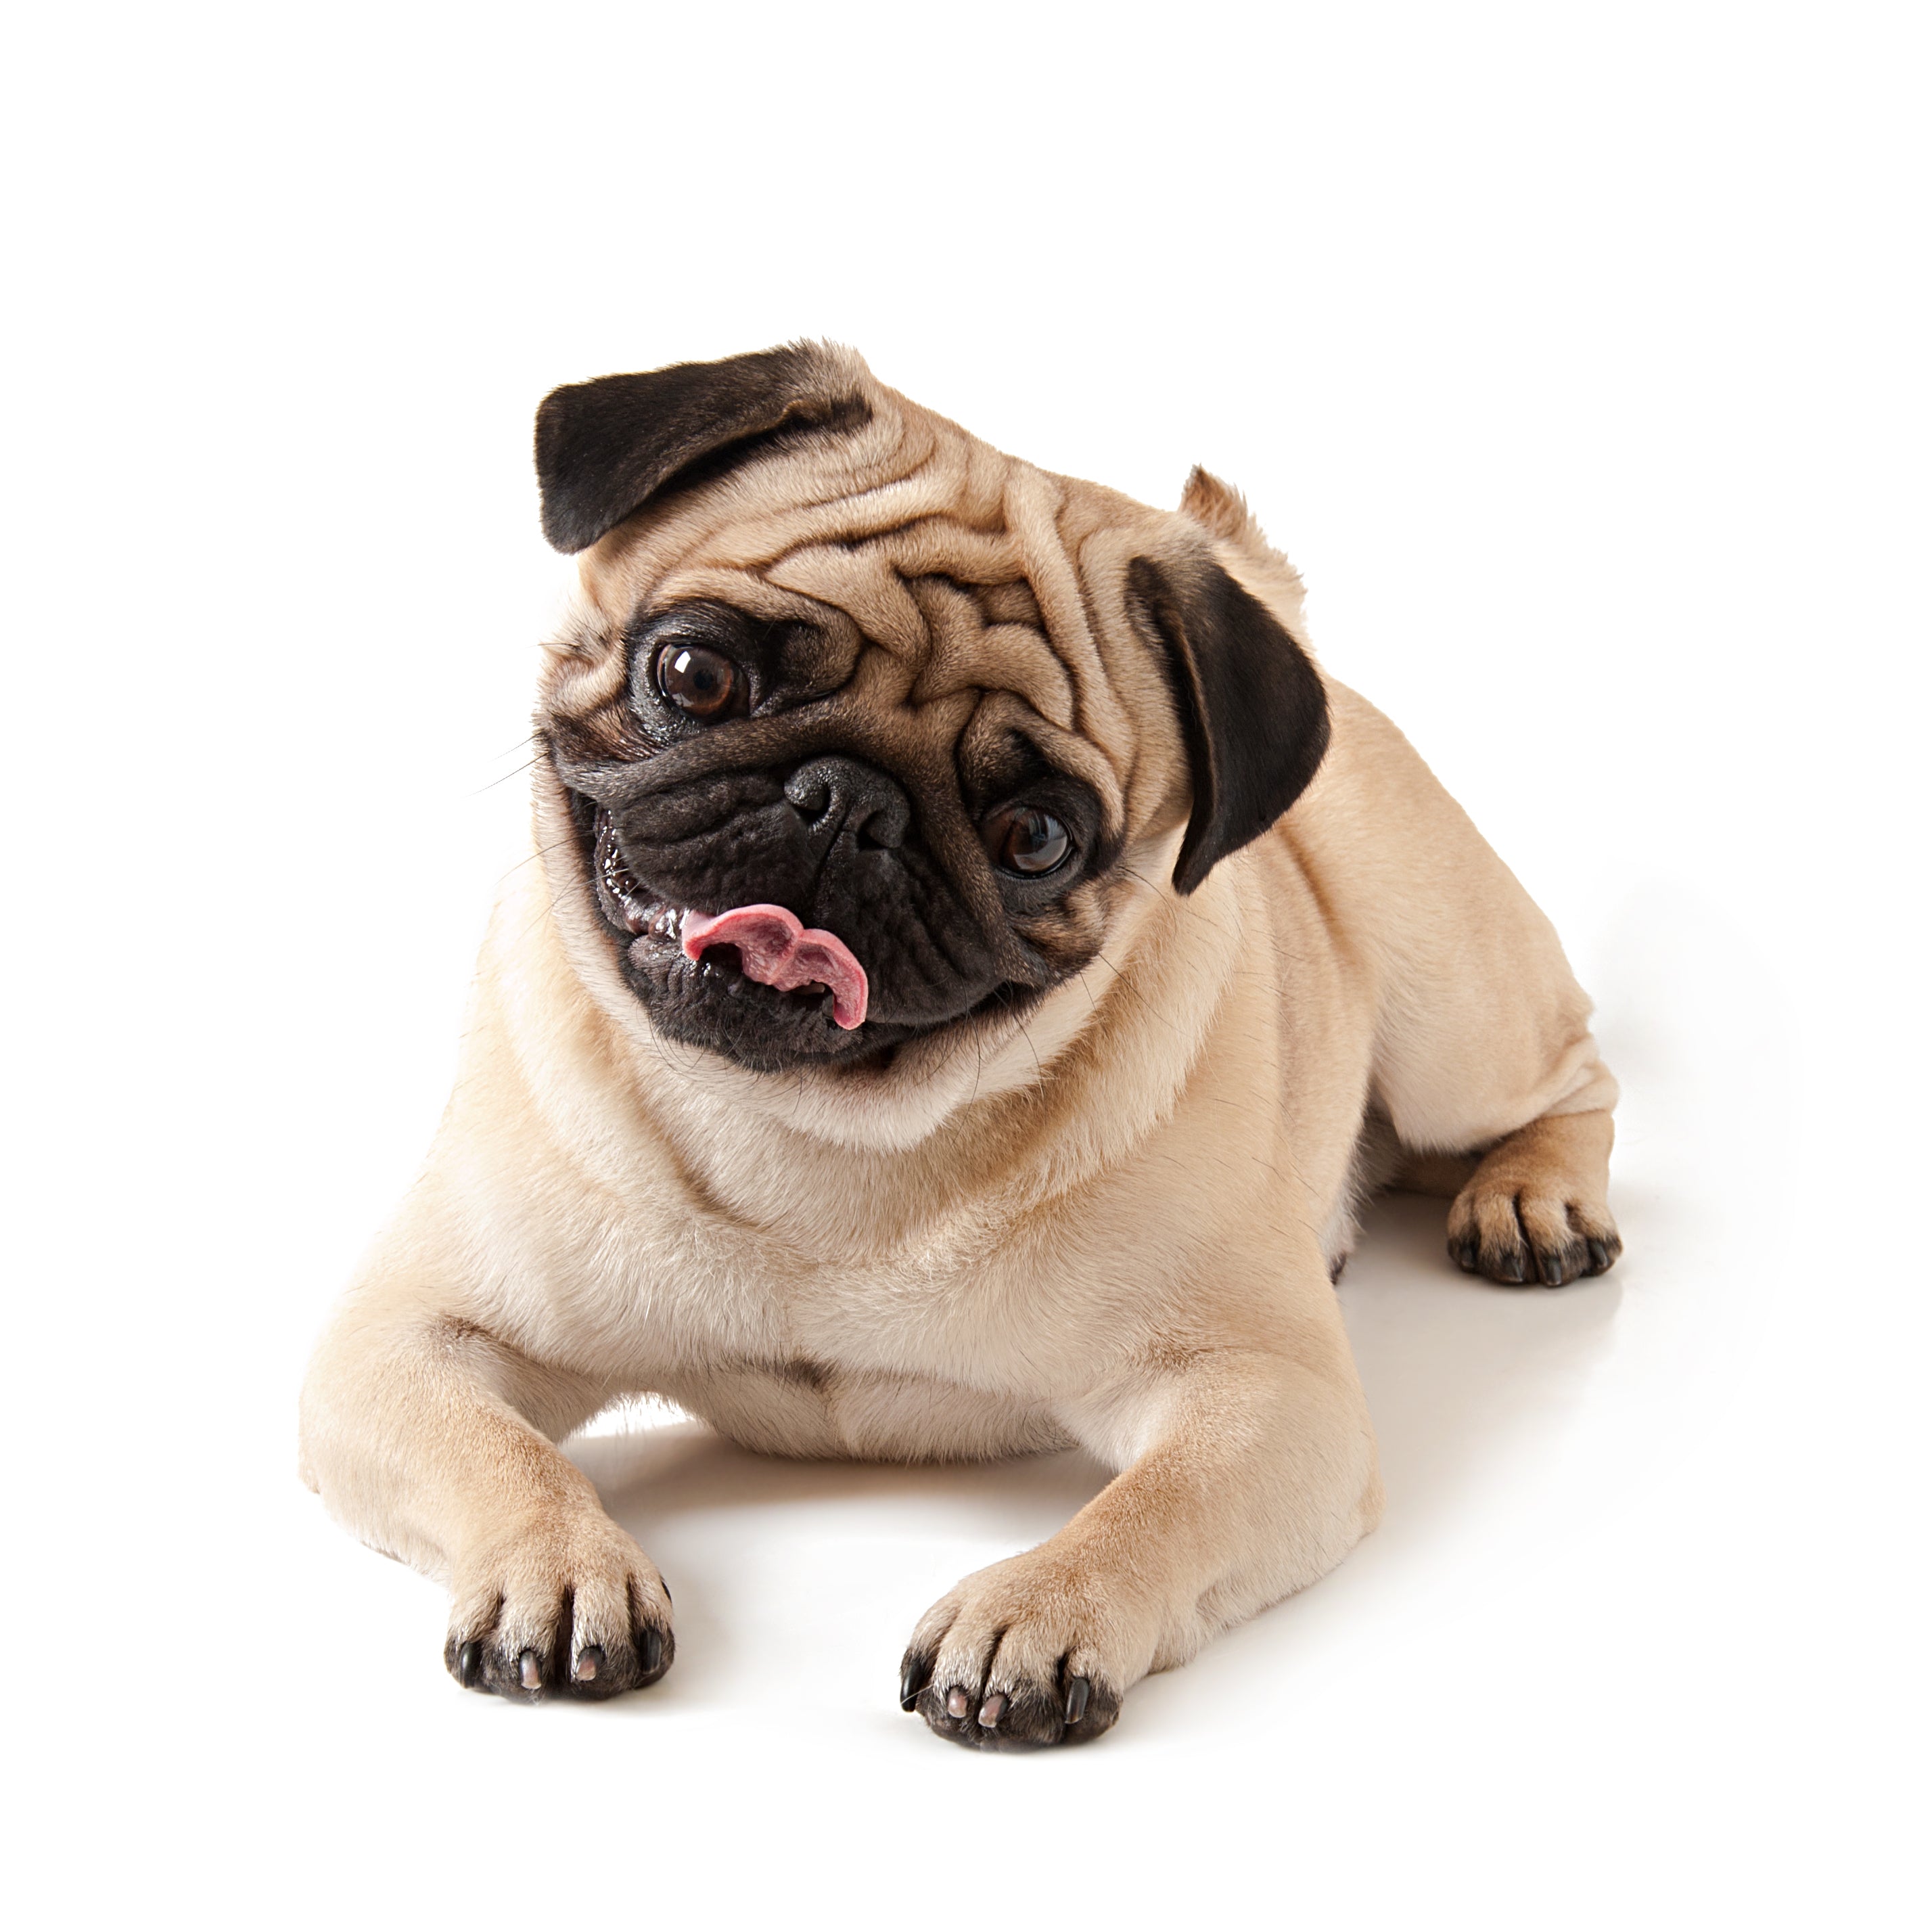 Pug: small, sweet and affectionate.